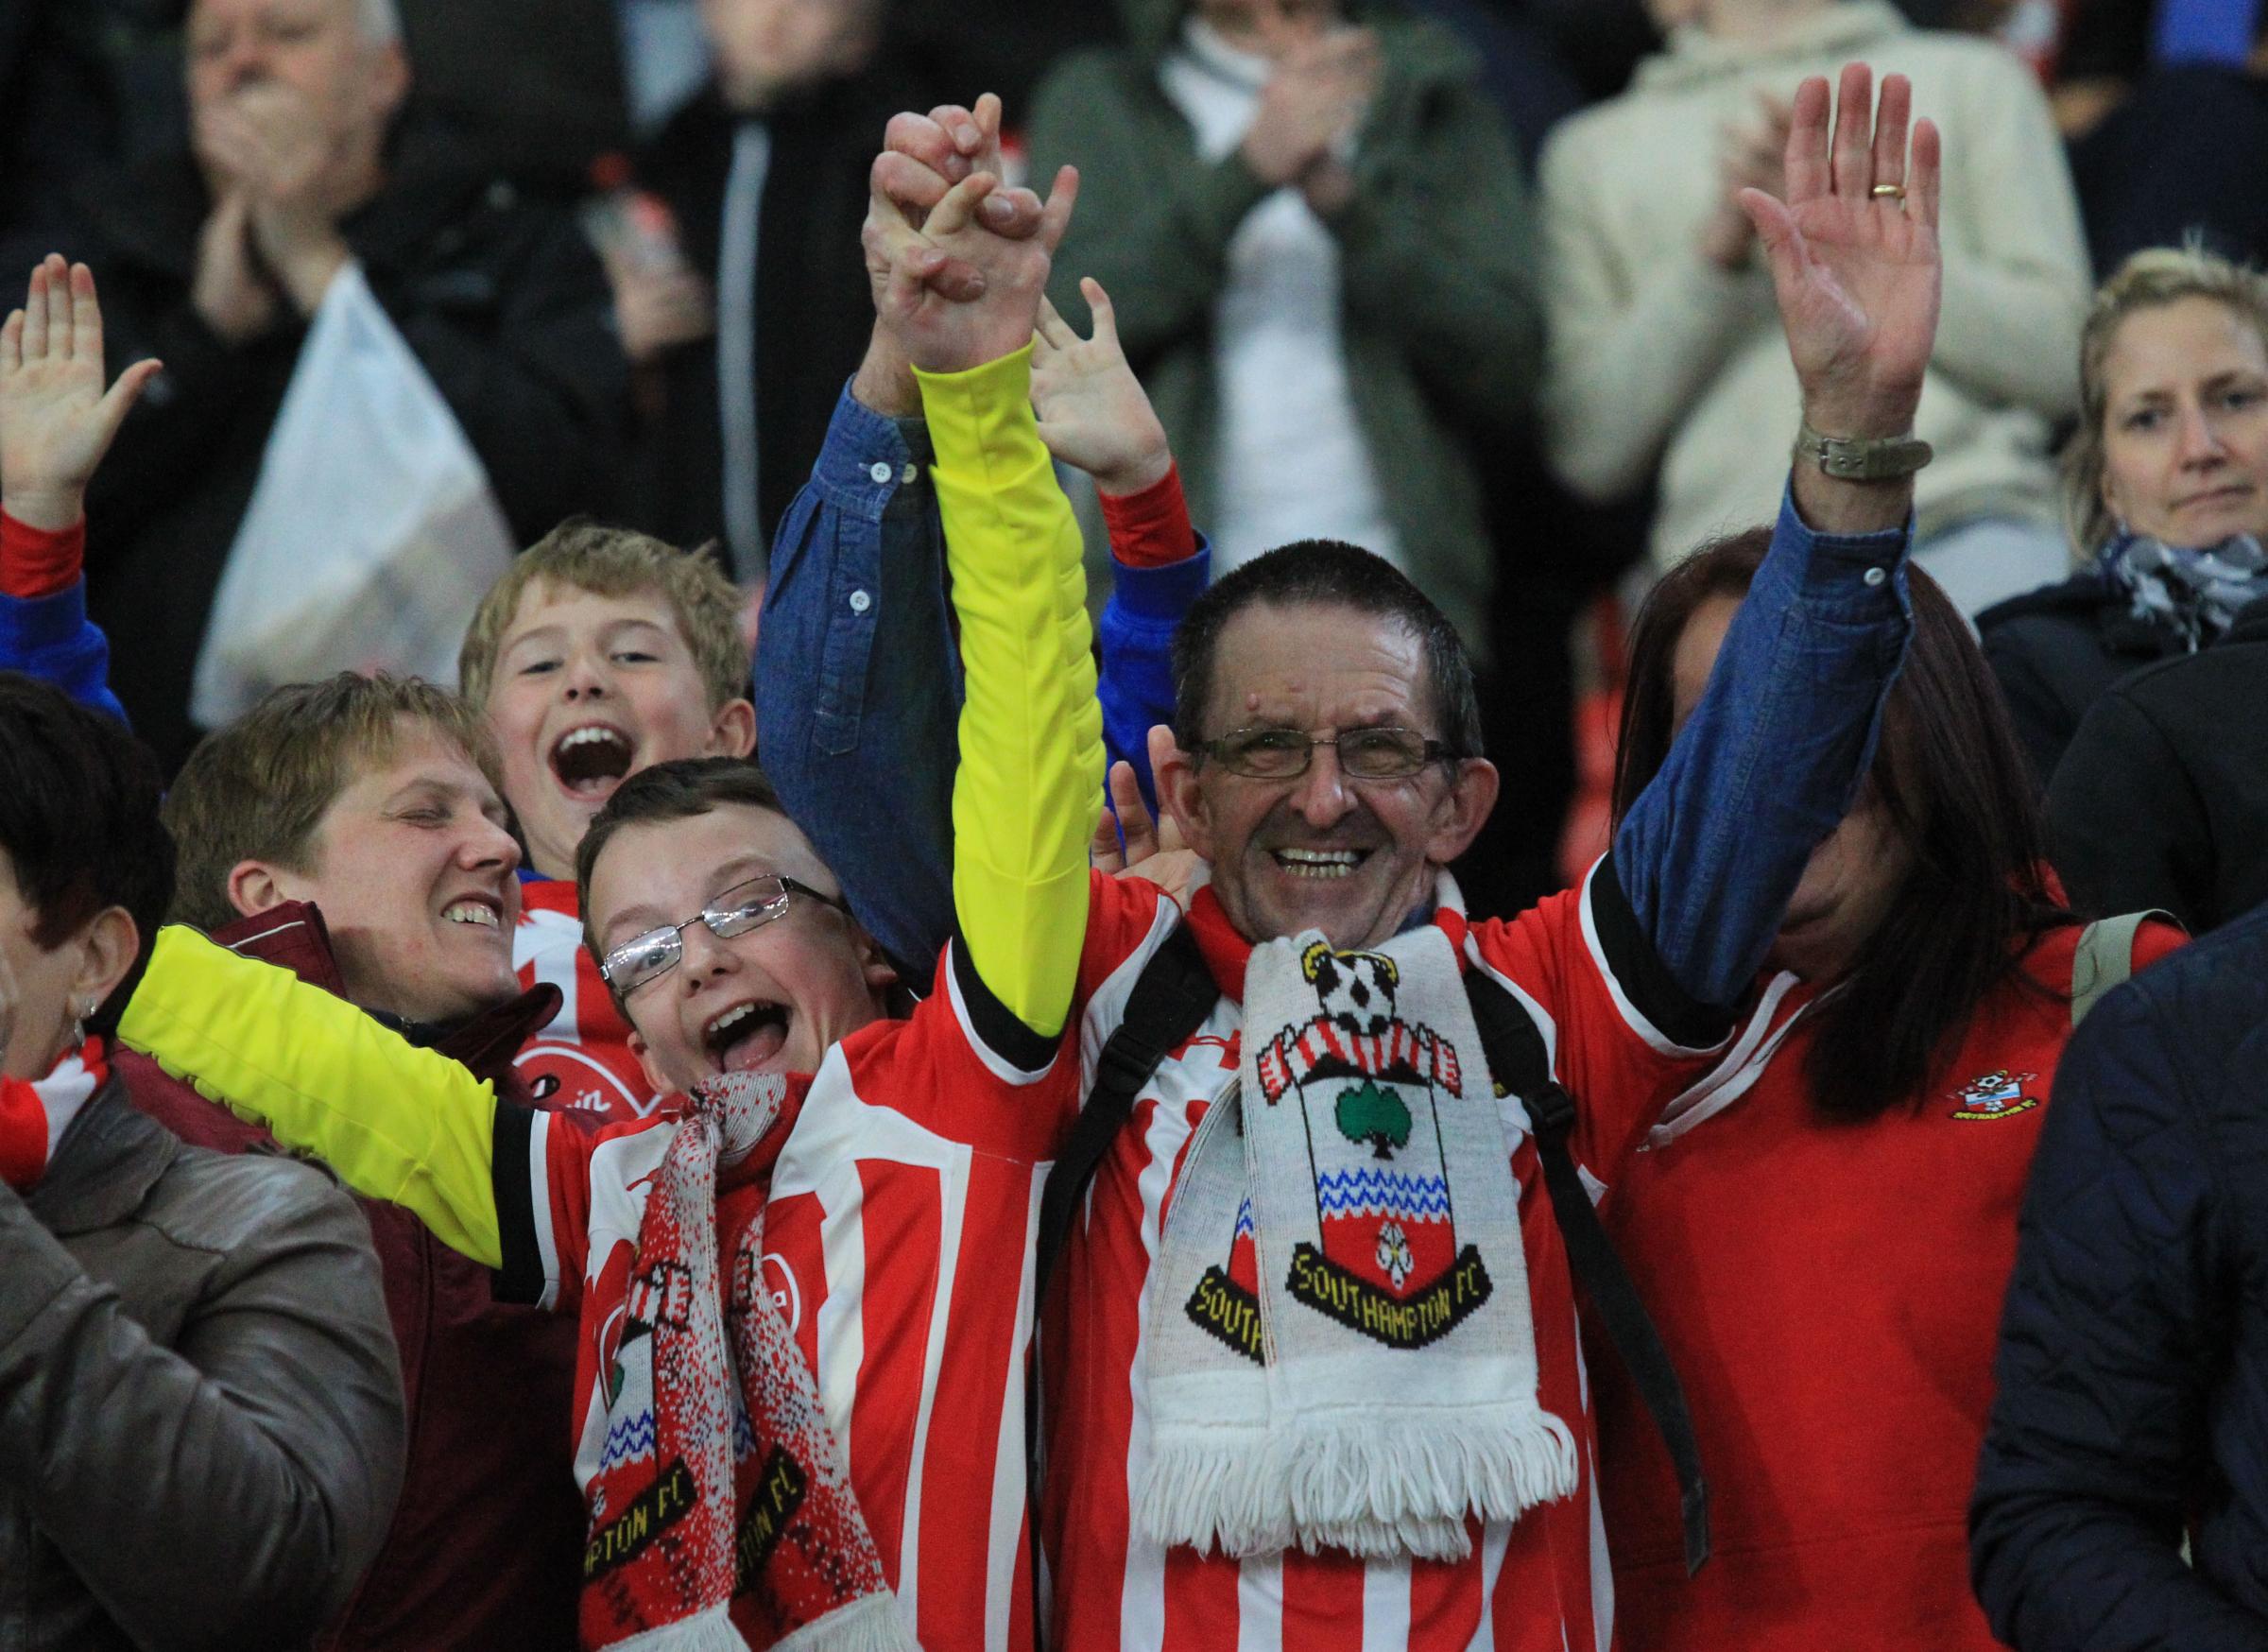 Southampton 3-1 Crystal Palace - are you in our fan pics?